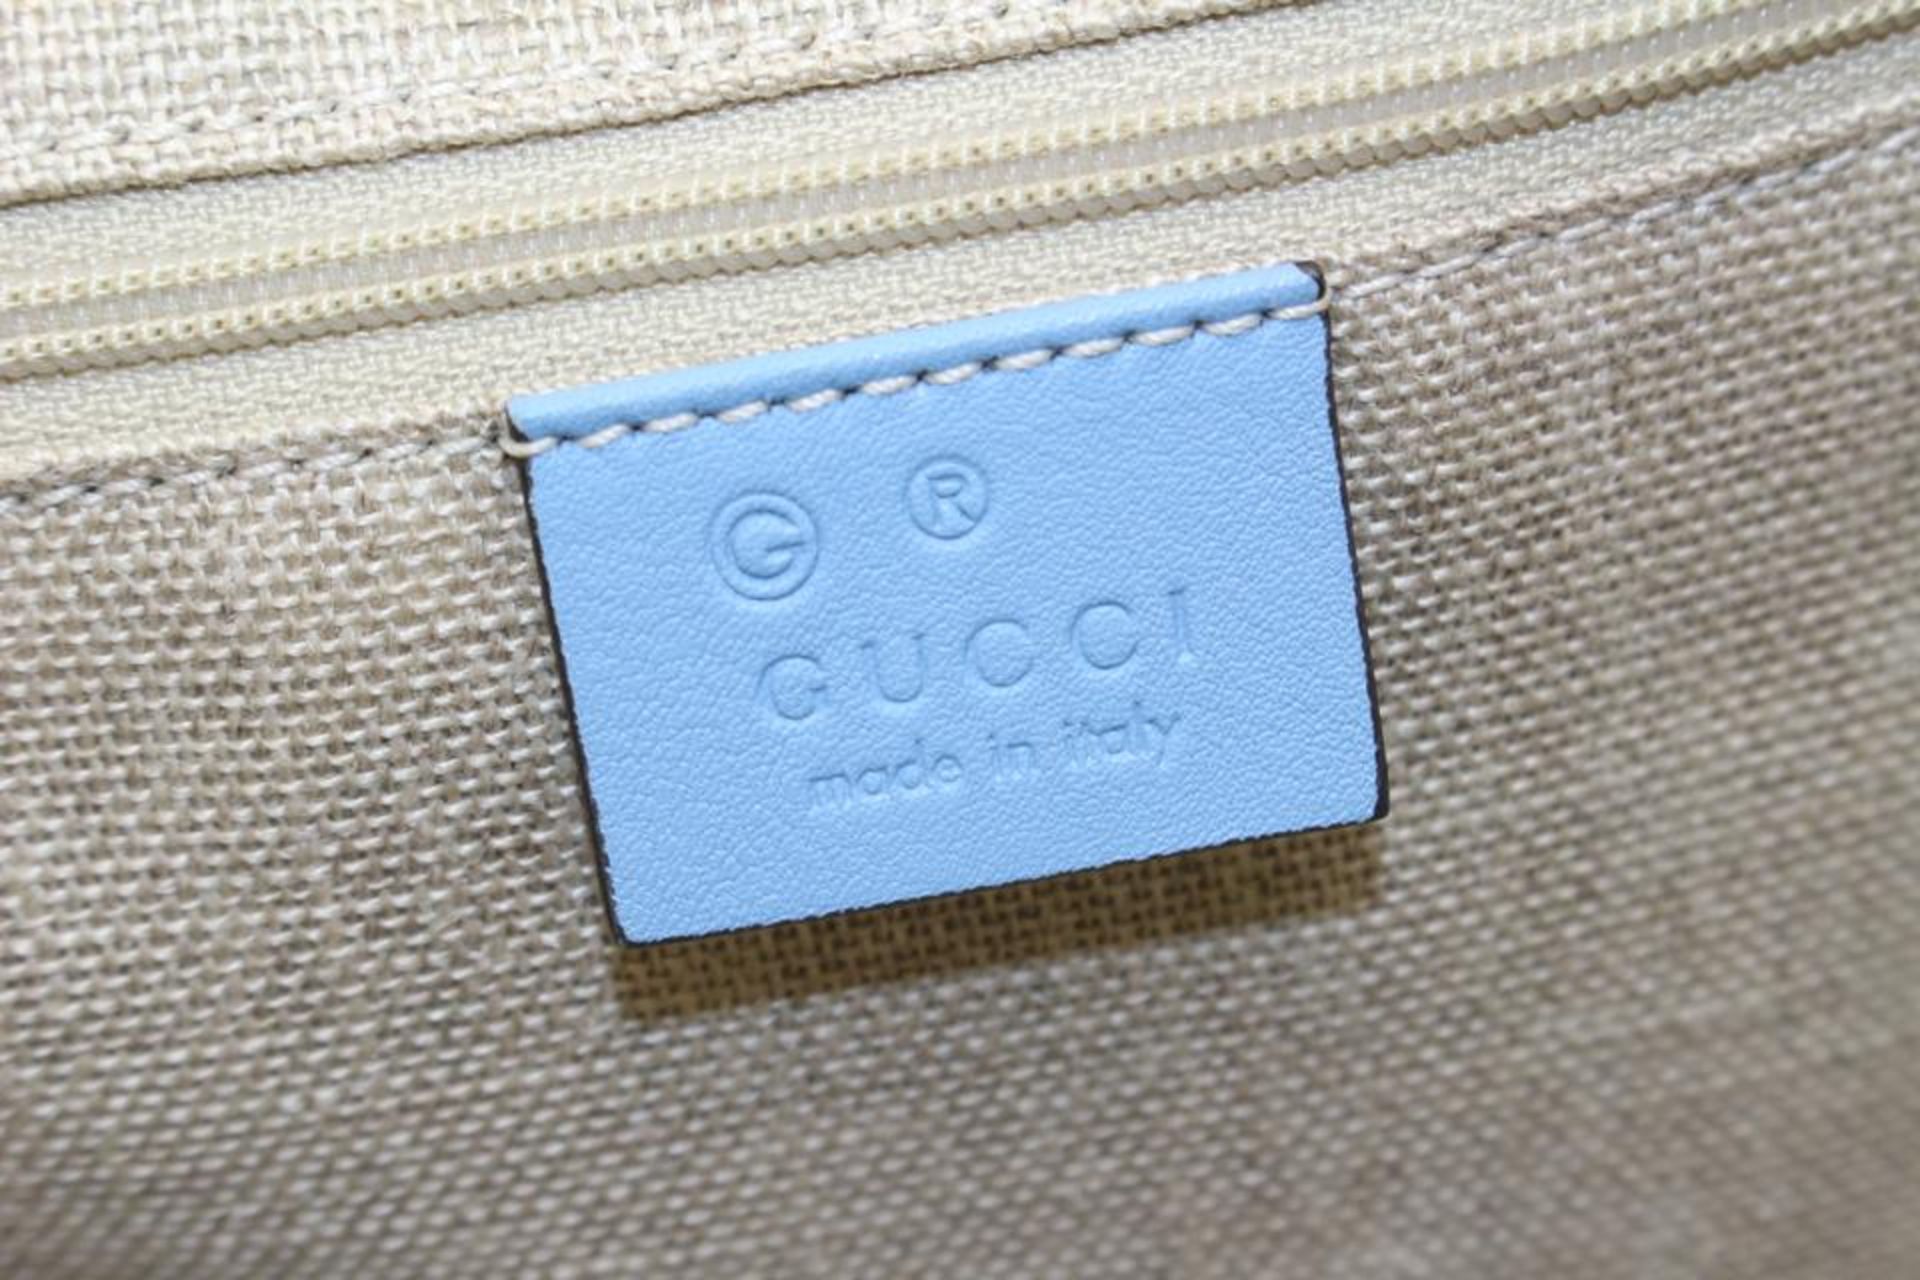 GUCCI LIGHT BLUE LEATHER MICROGUCCISSIMA LARGE JOY TOTE - Image 11 of 12